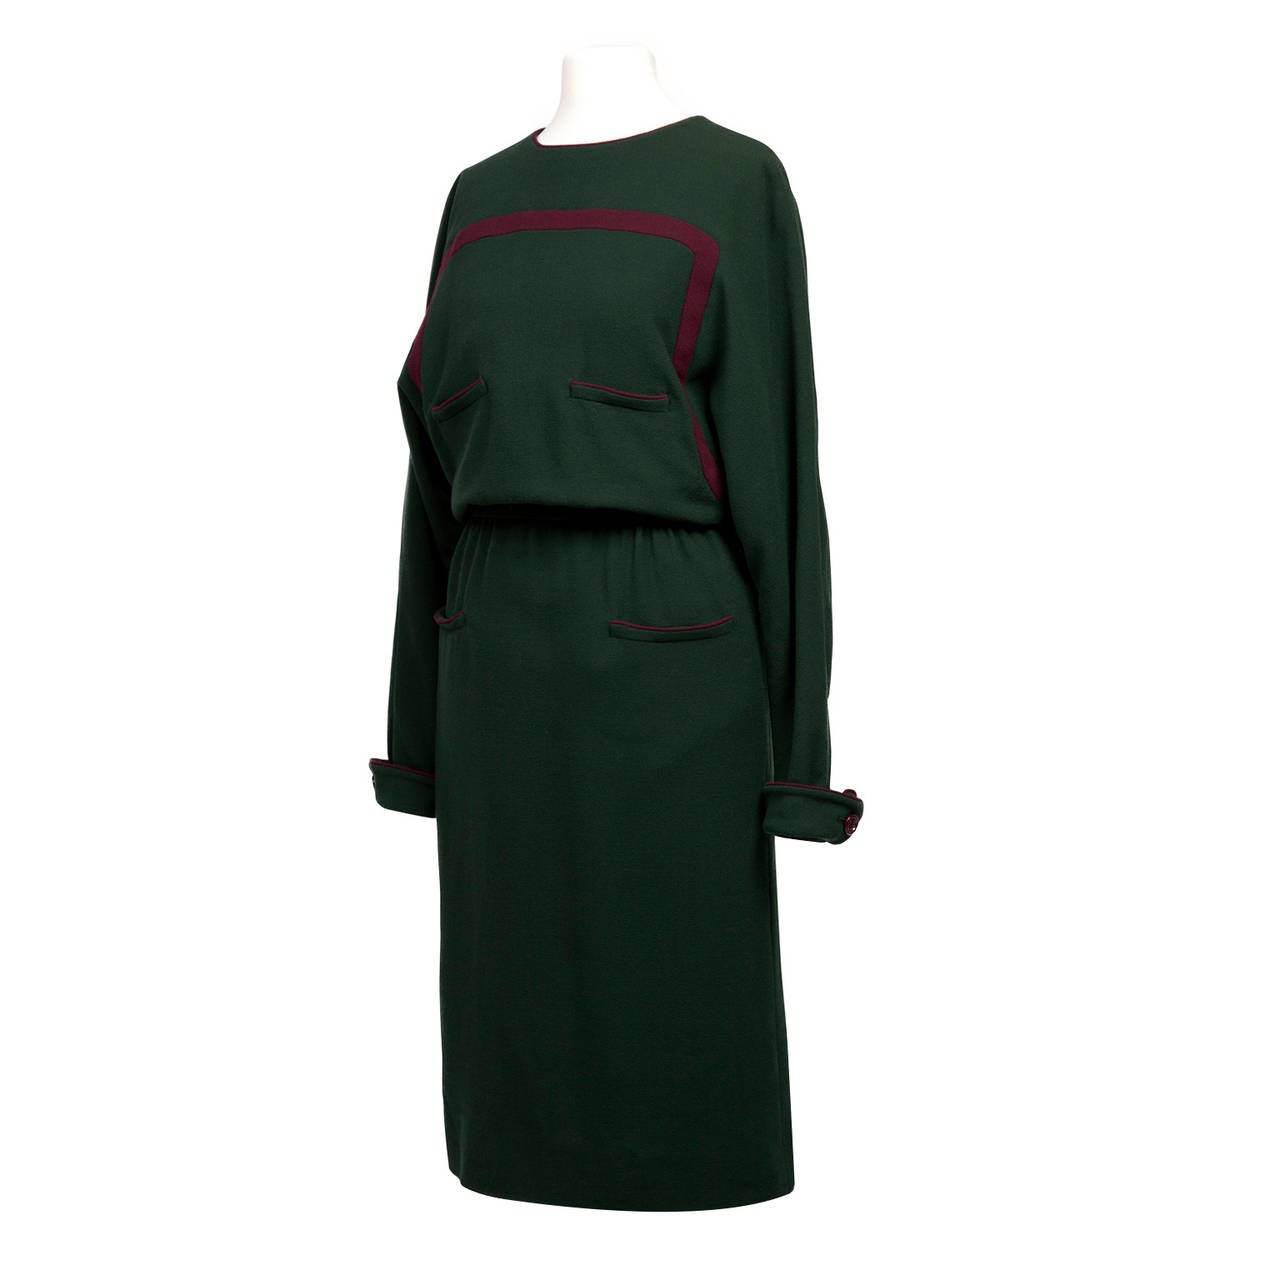 Dark moss green dress with bordeaux stripe. The center front stripe continues  underneath arms and to the center back. Sz. M